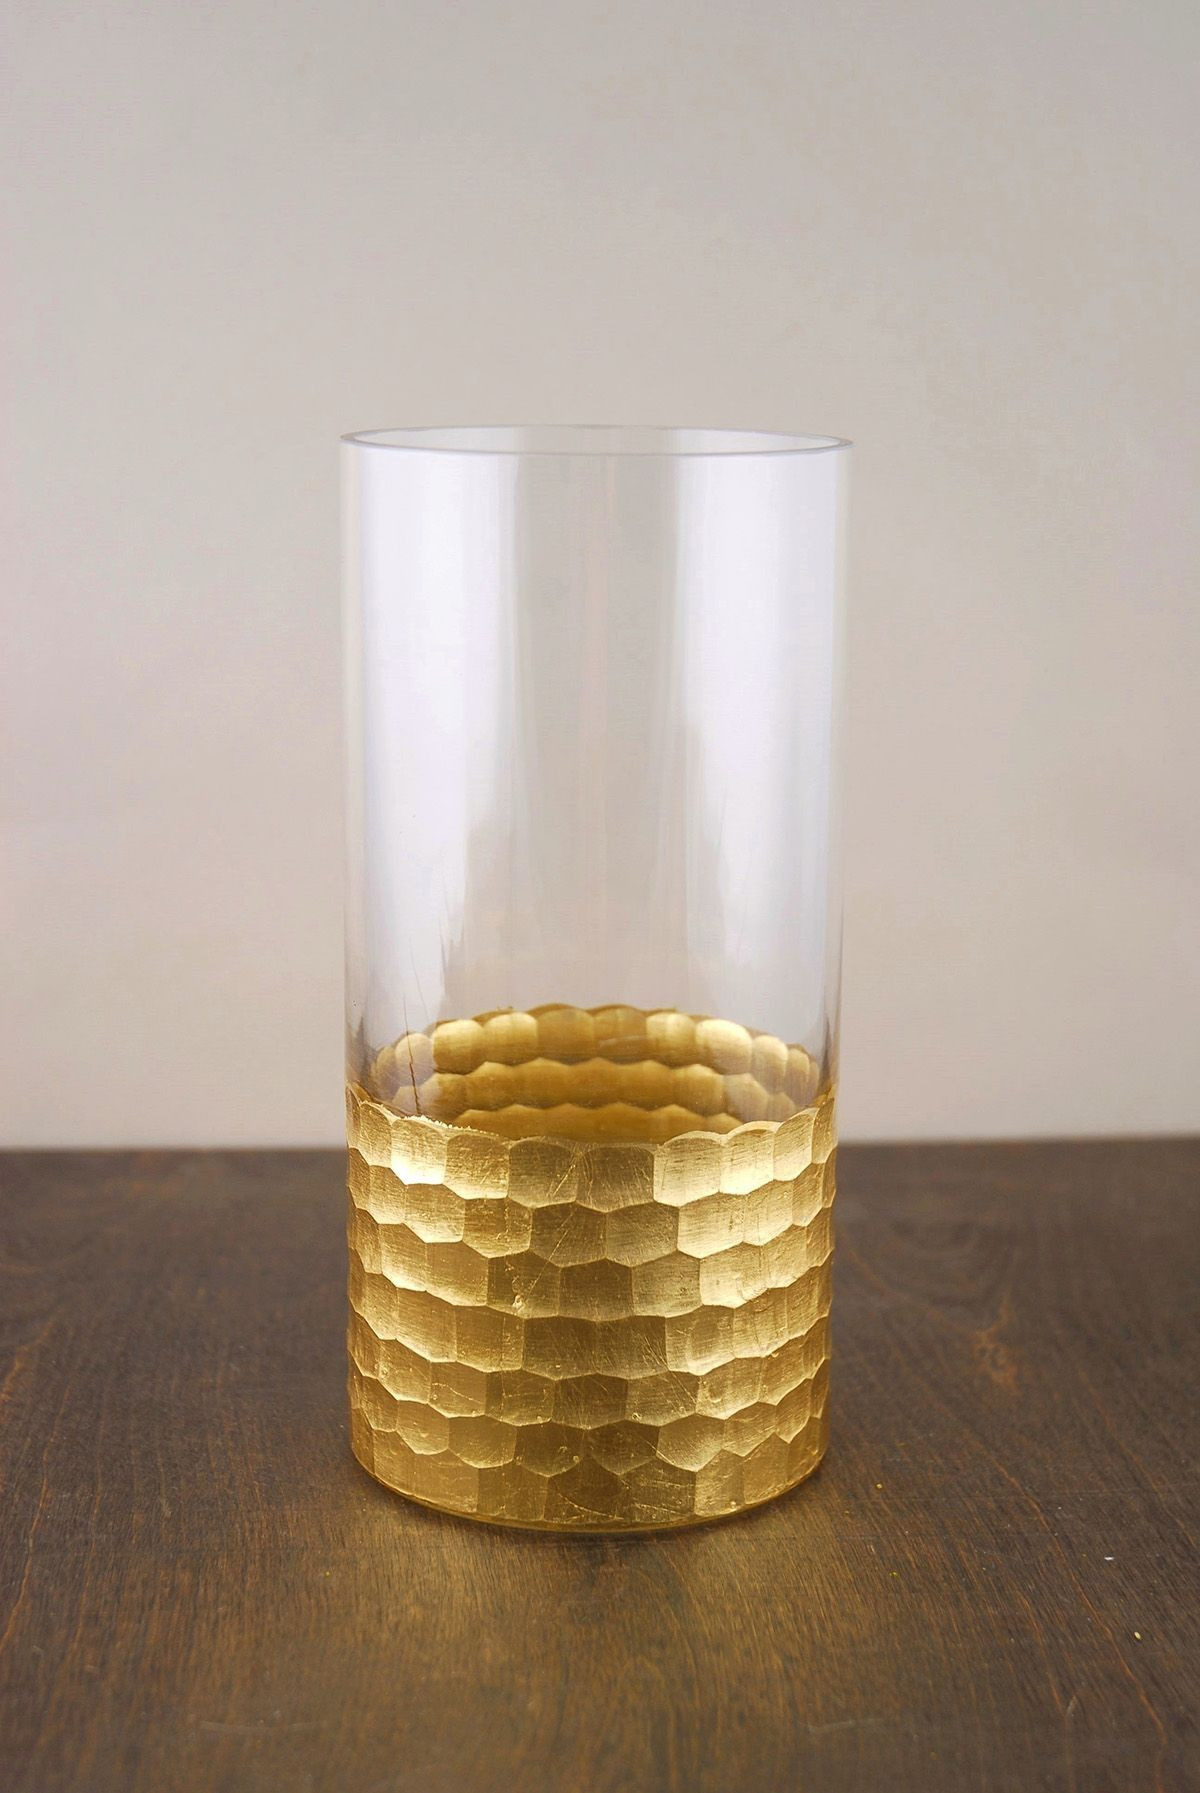 17 attractive 3 Glass Vases 2024 free download 3 glass vases of gold mercury glass vases inspirational gold cylinder vases in gold mercury glass vases inspirational gold cylinder vases collection silver and gold mercury glass mosaic